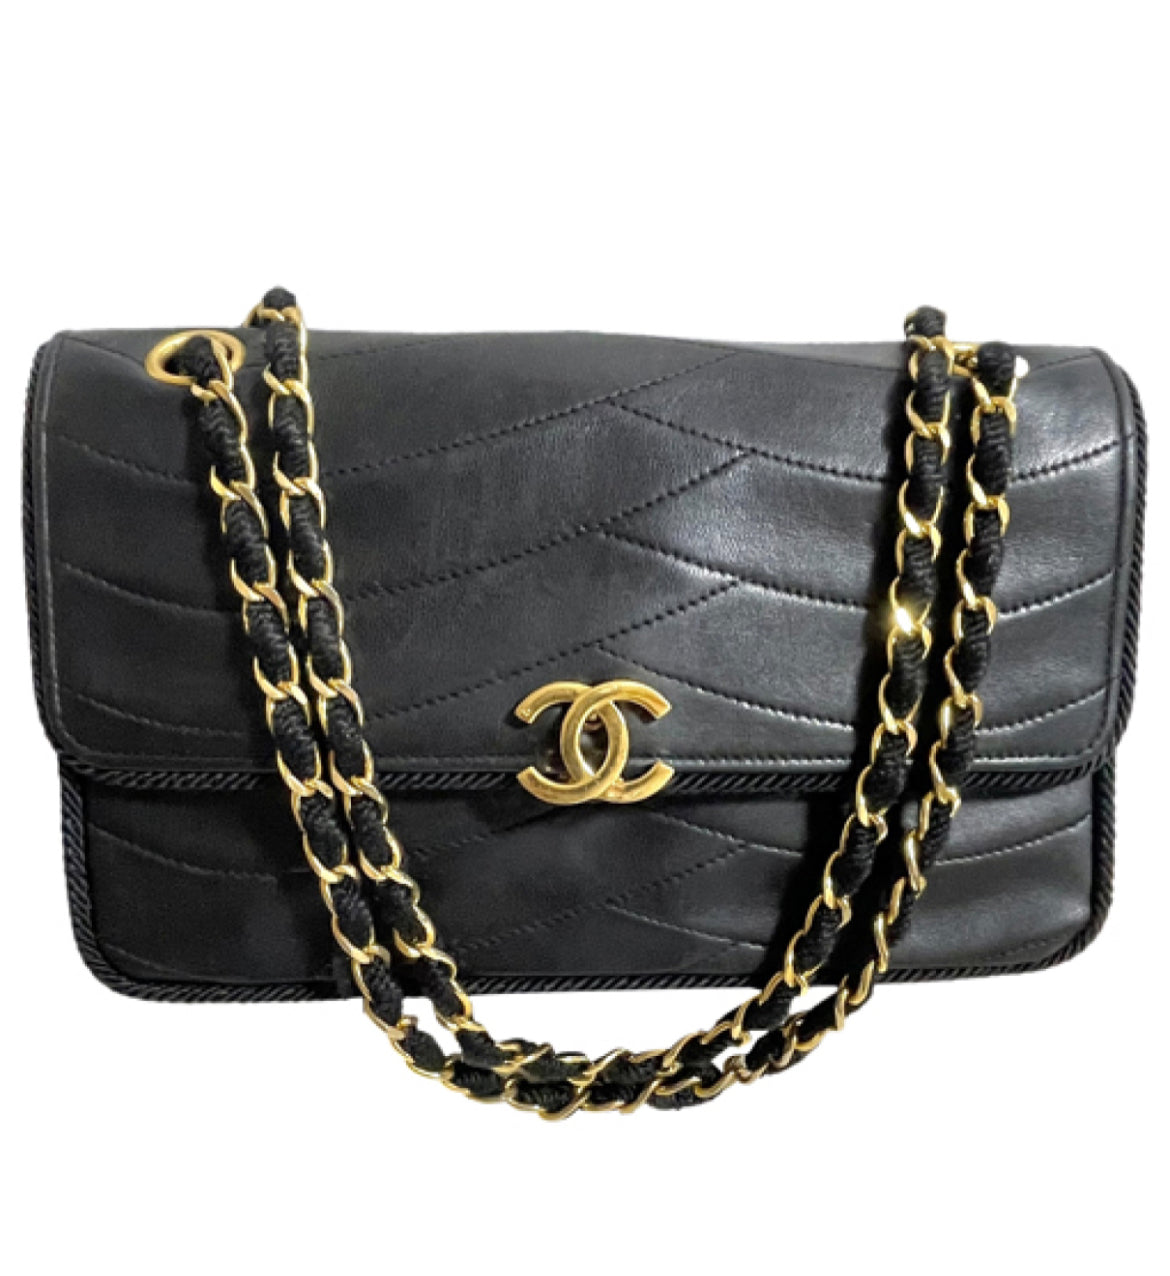 80's vintage Chanel black 2.55 shoulder bag with wavy stitches and rope strings and gold chain strap. Very rare piece from the era. 050730ra